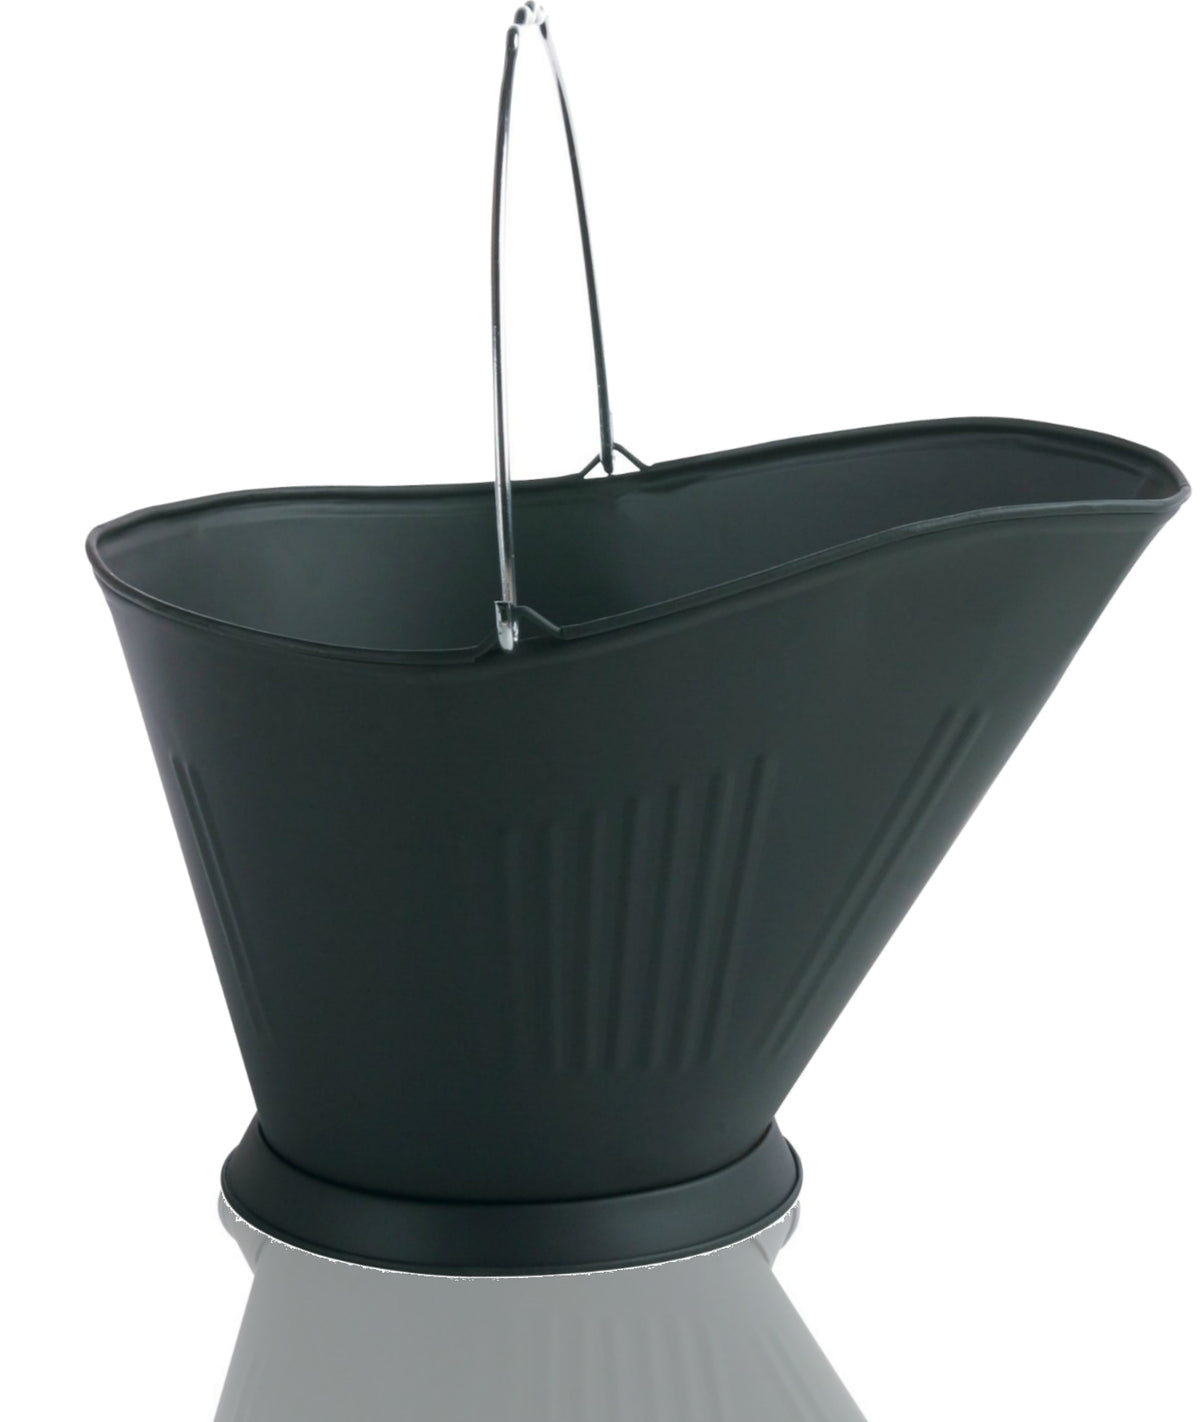 buy ash buckets, fireplace & stove accessories at cheap rate in bulk. wholesale & retail fireplace goods & supplies store.